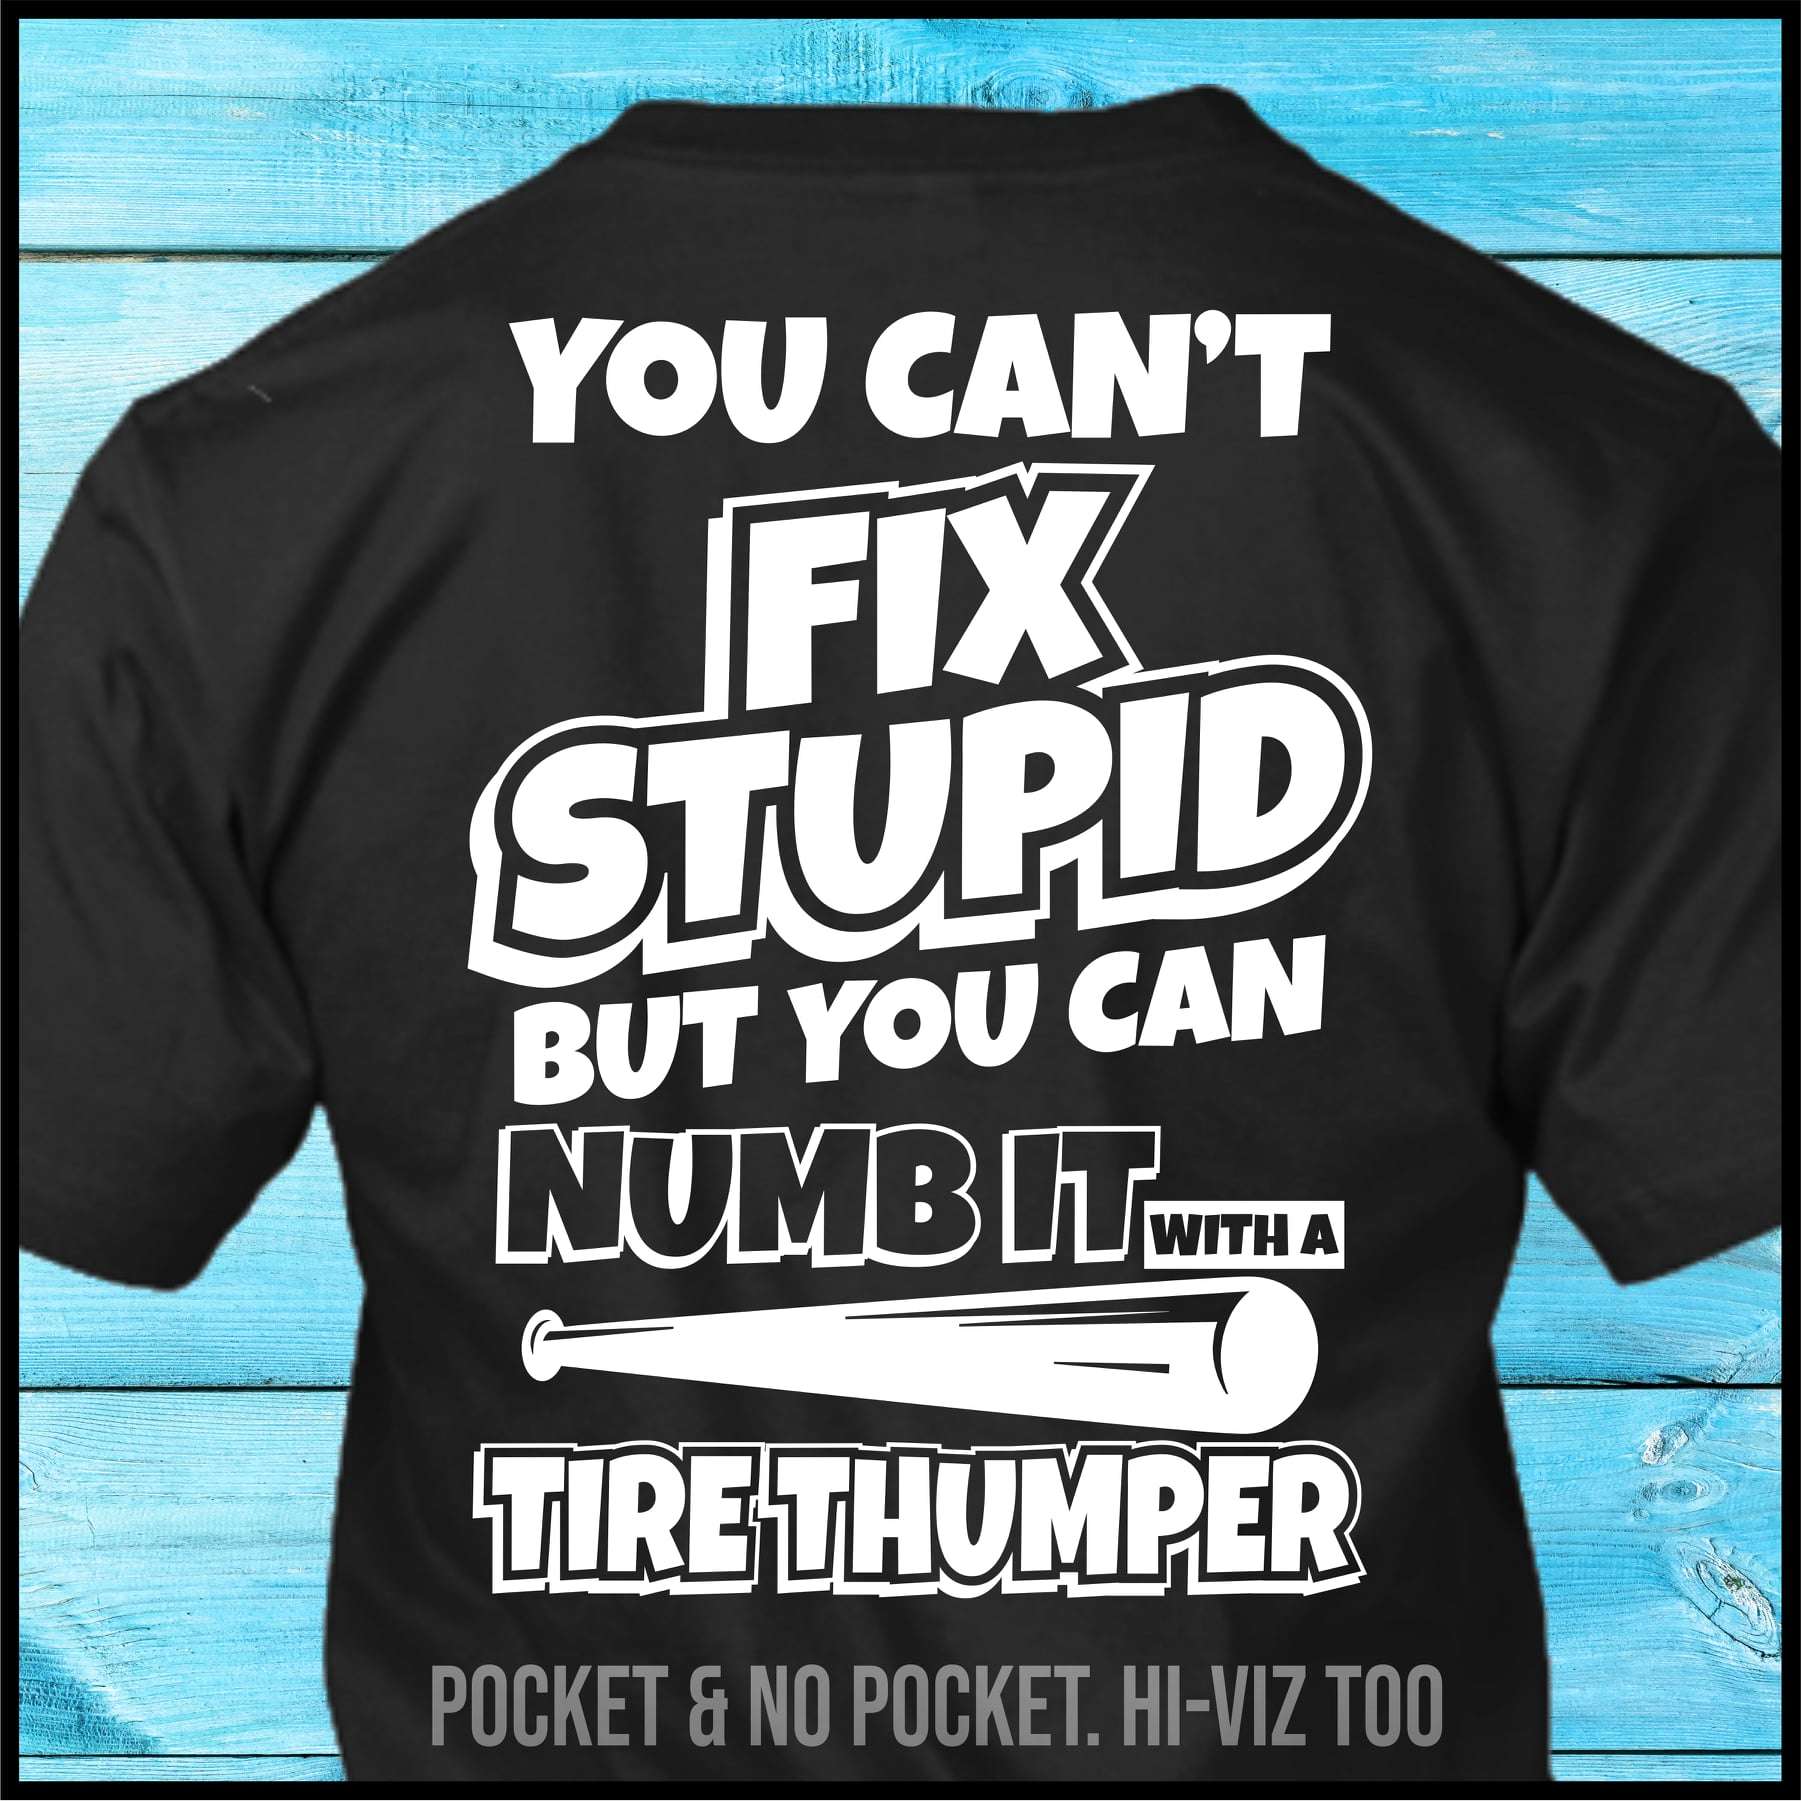 You can't fix stupid but you can numb it with a tire thumper - Baseball thumper